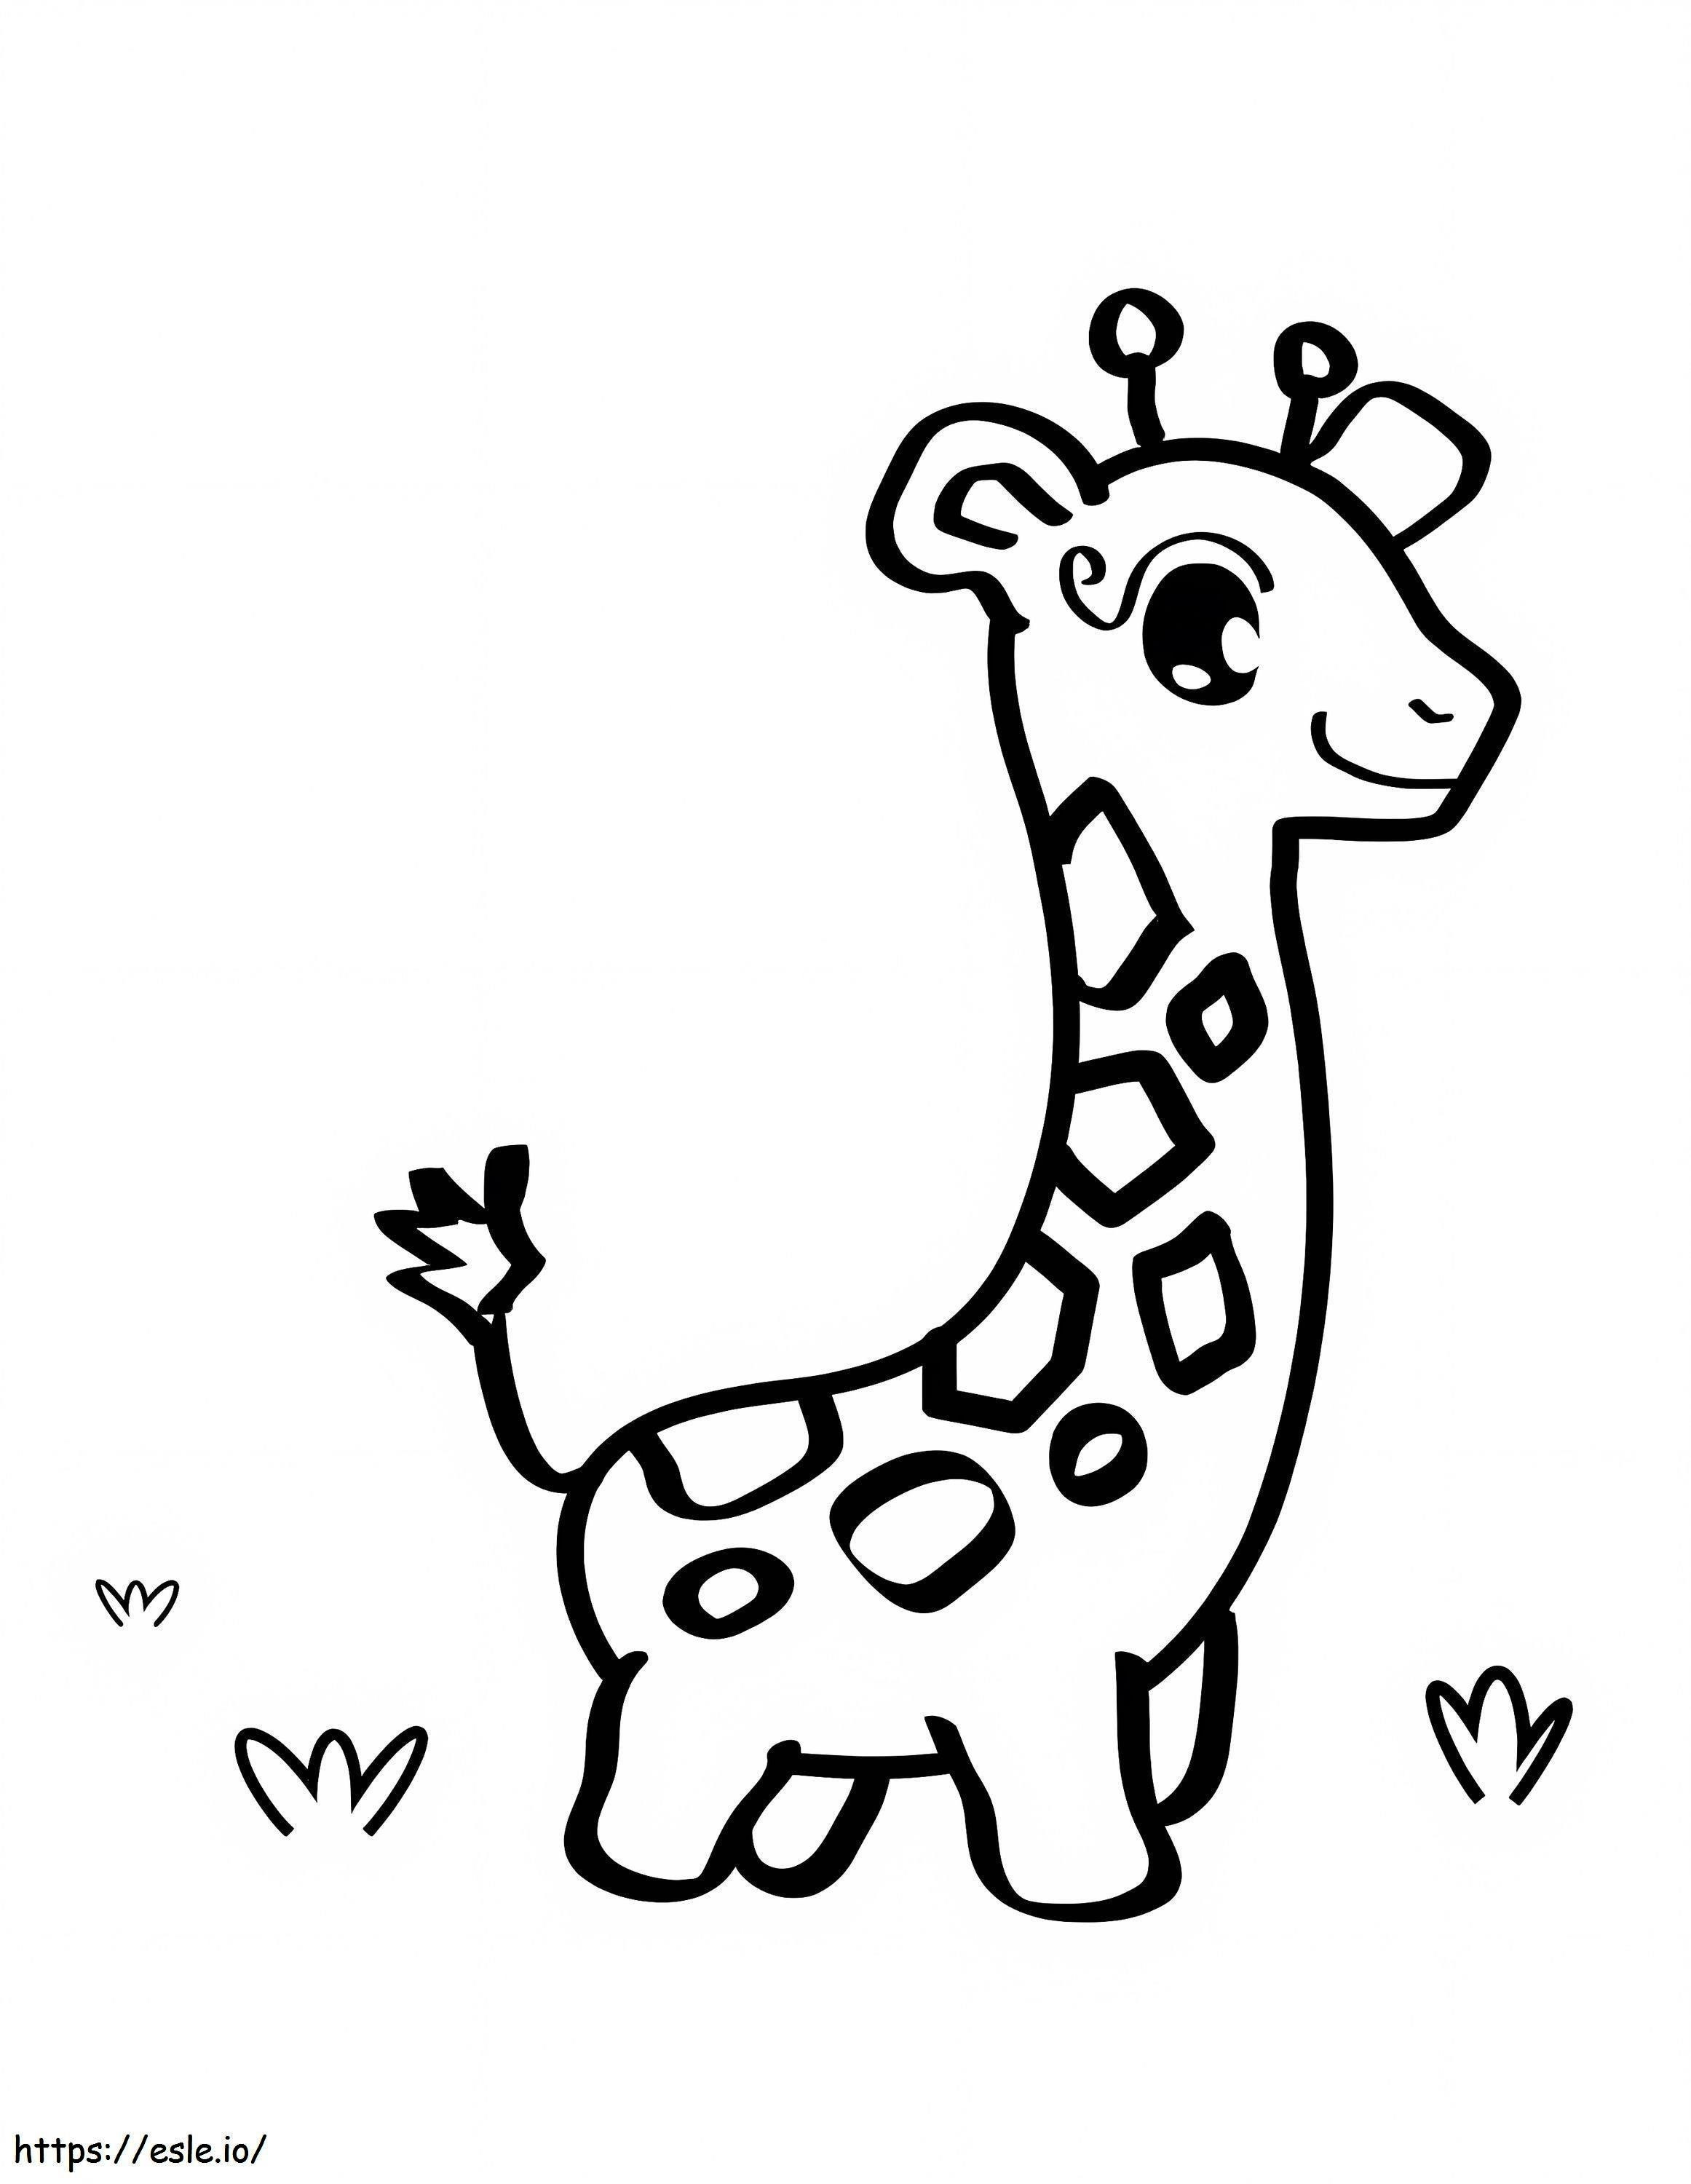 Cute Giraffe For 1 Year Old Kids coloring page